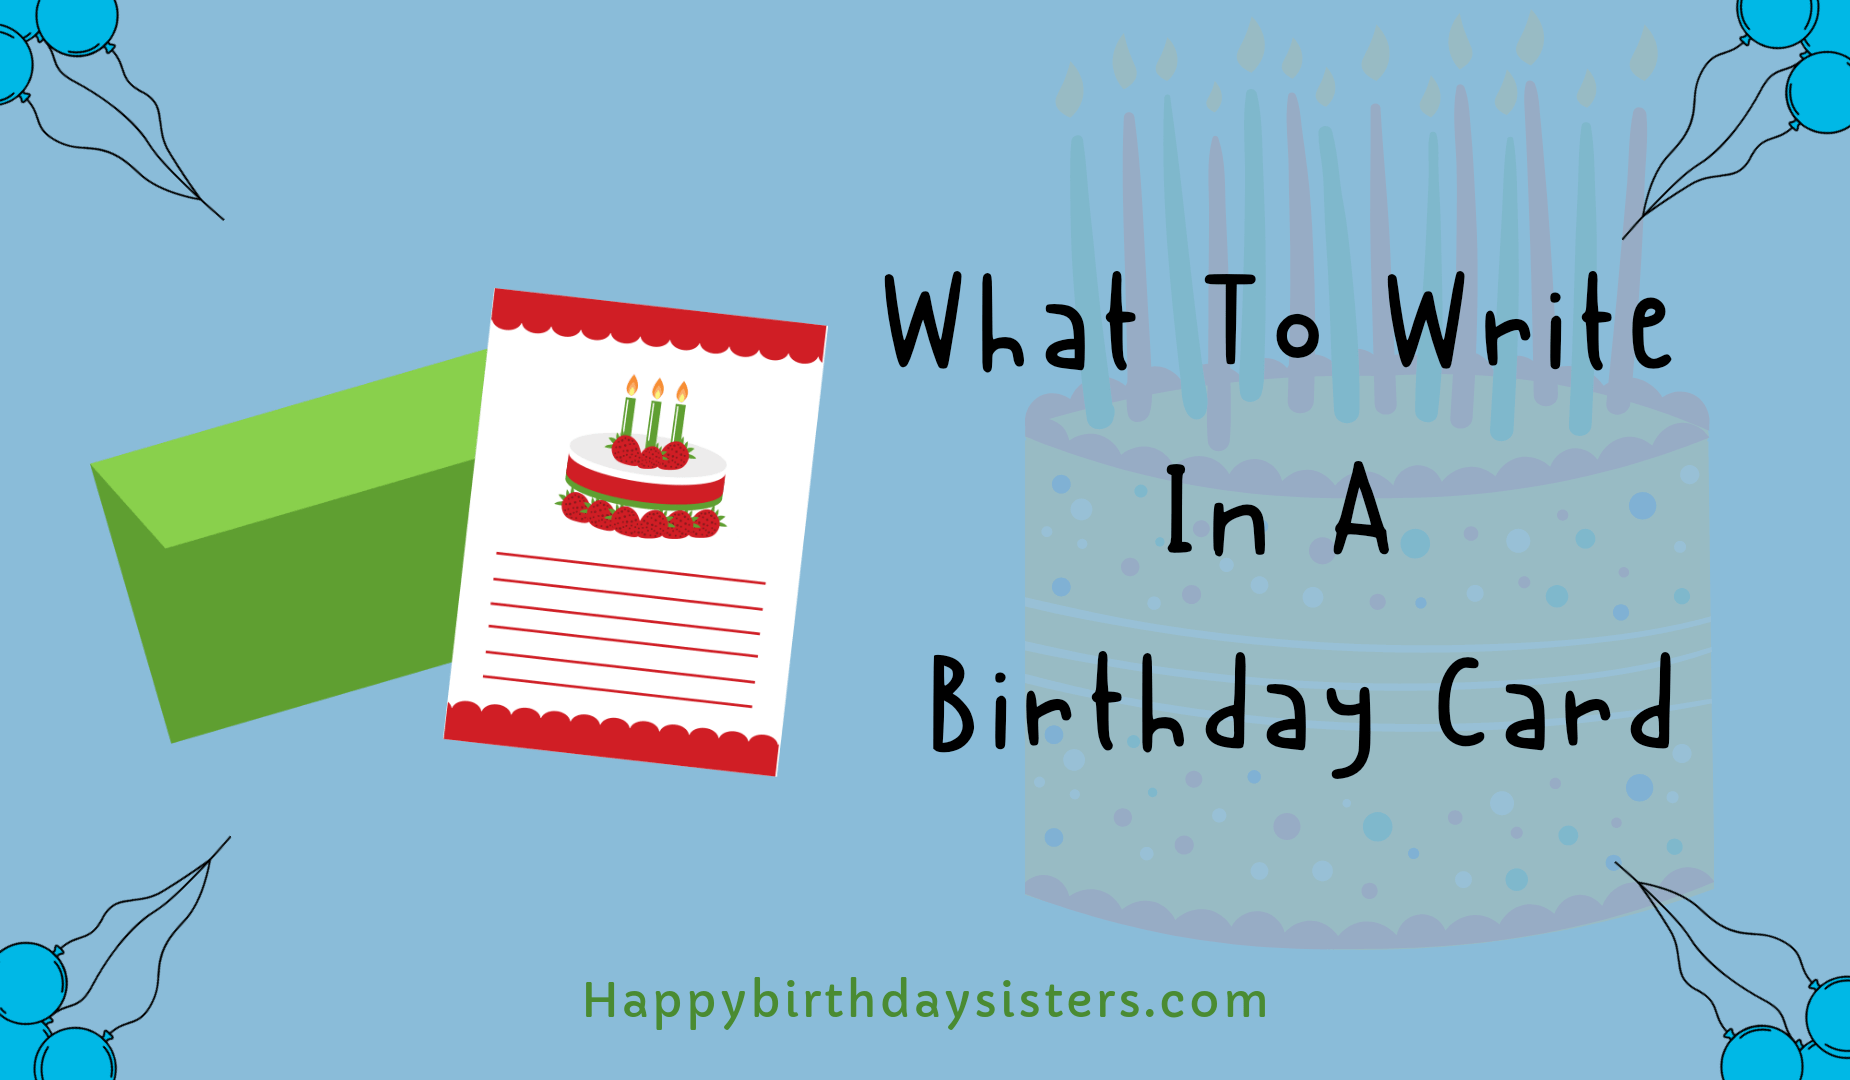 what-to-write-in-a-birthday-card-for-a-buddy-ultra-heal